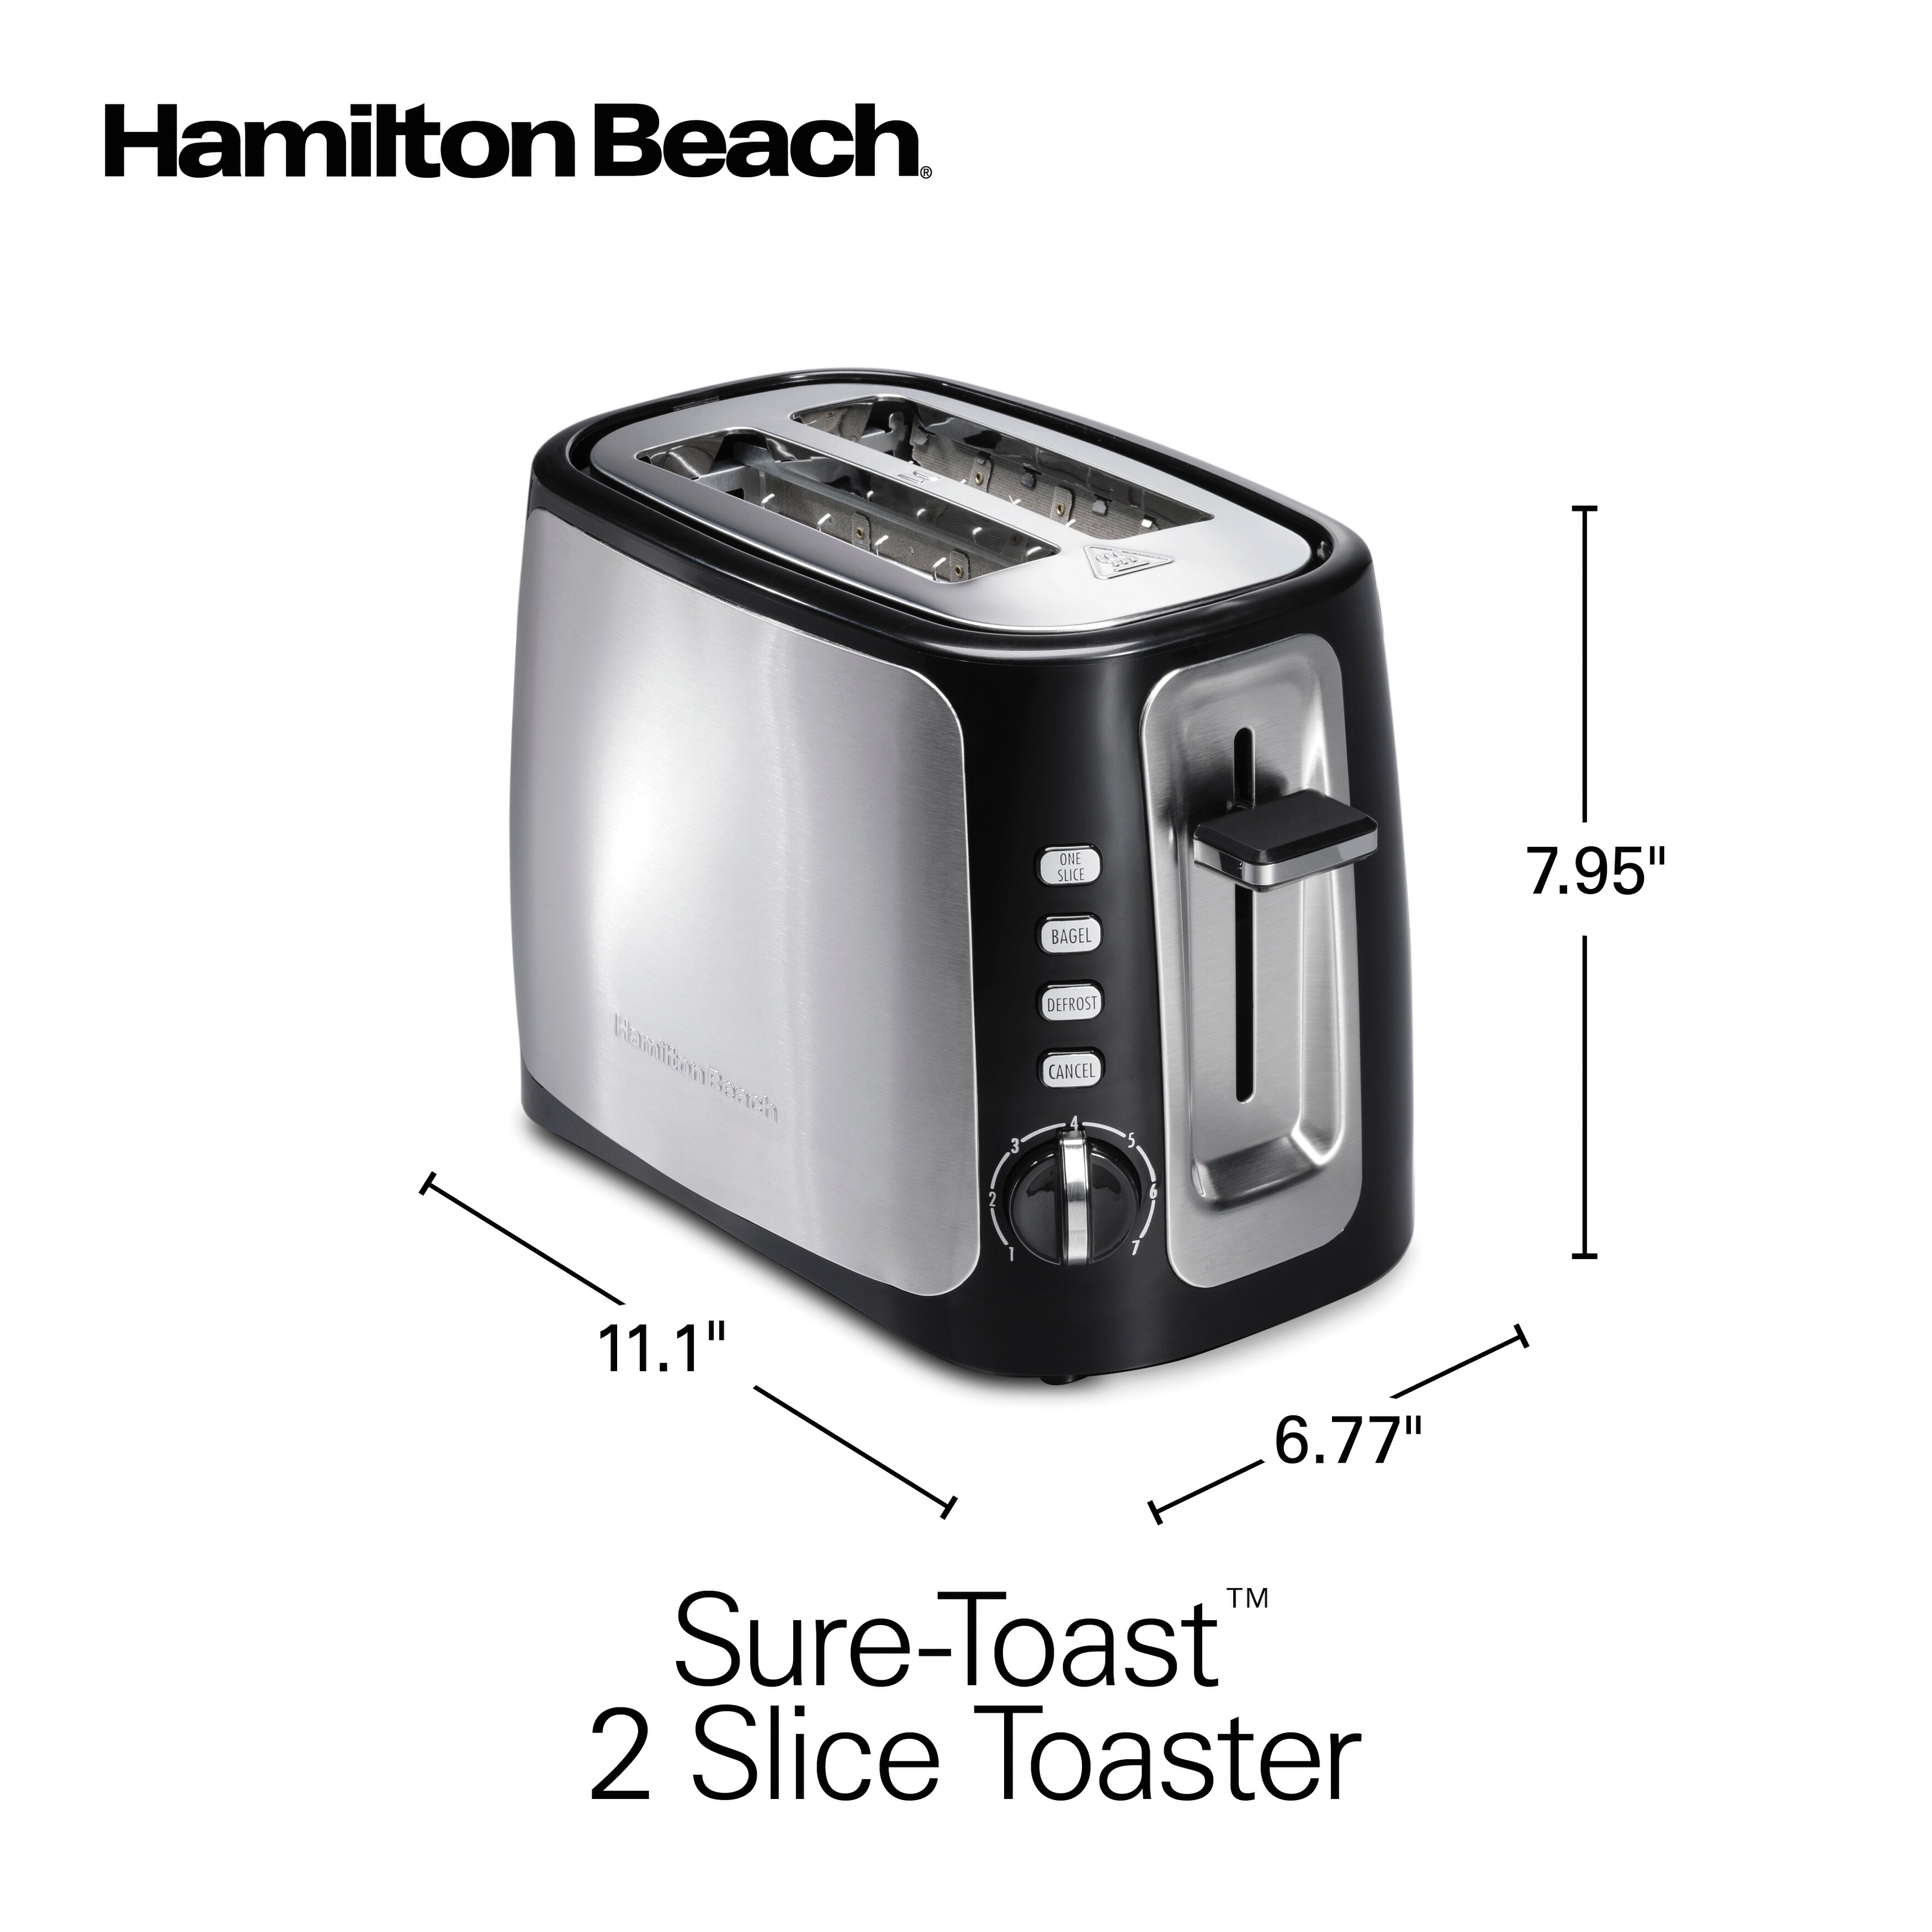 https://ak1.ostkcdn.com/images/products/is/images/direct/fce3e5d4f2106c2b03a6e52949df5bfc00810b4b/Hamilton-Beach-Sure-Toast-2-Slice-Toaster-with-Toast-Boost.jpg